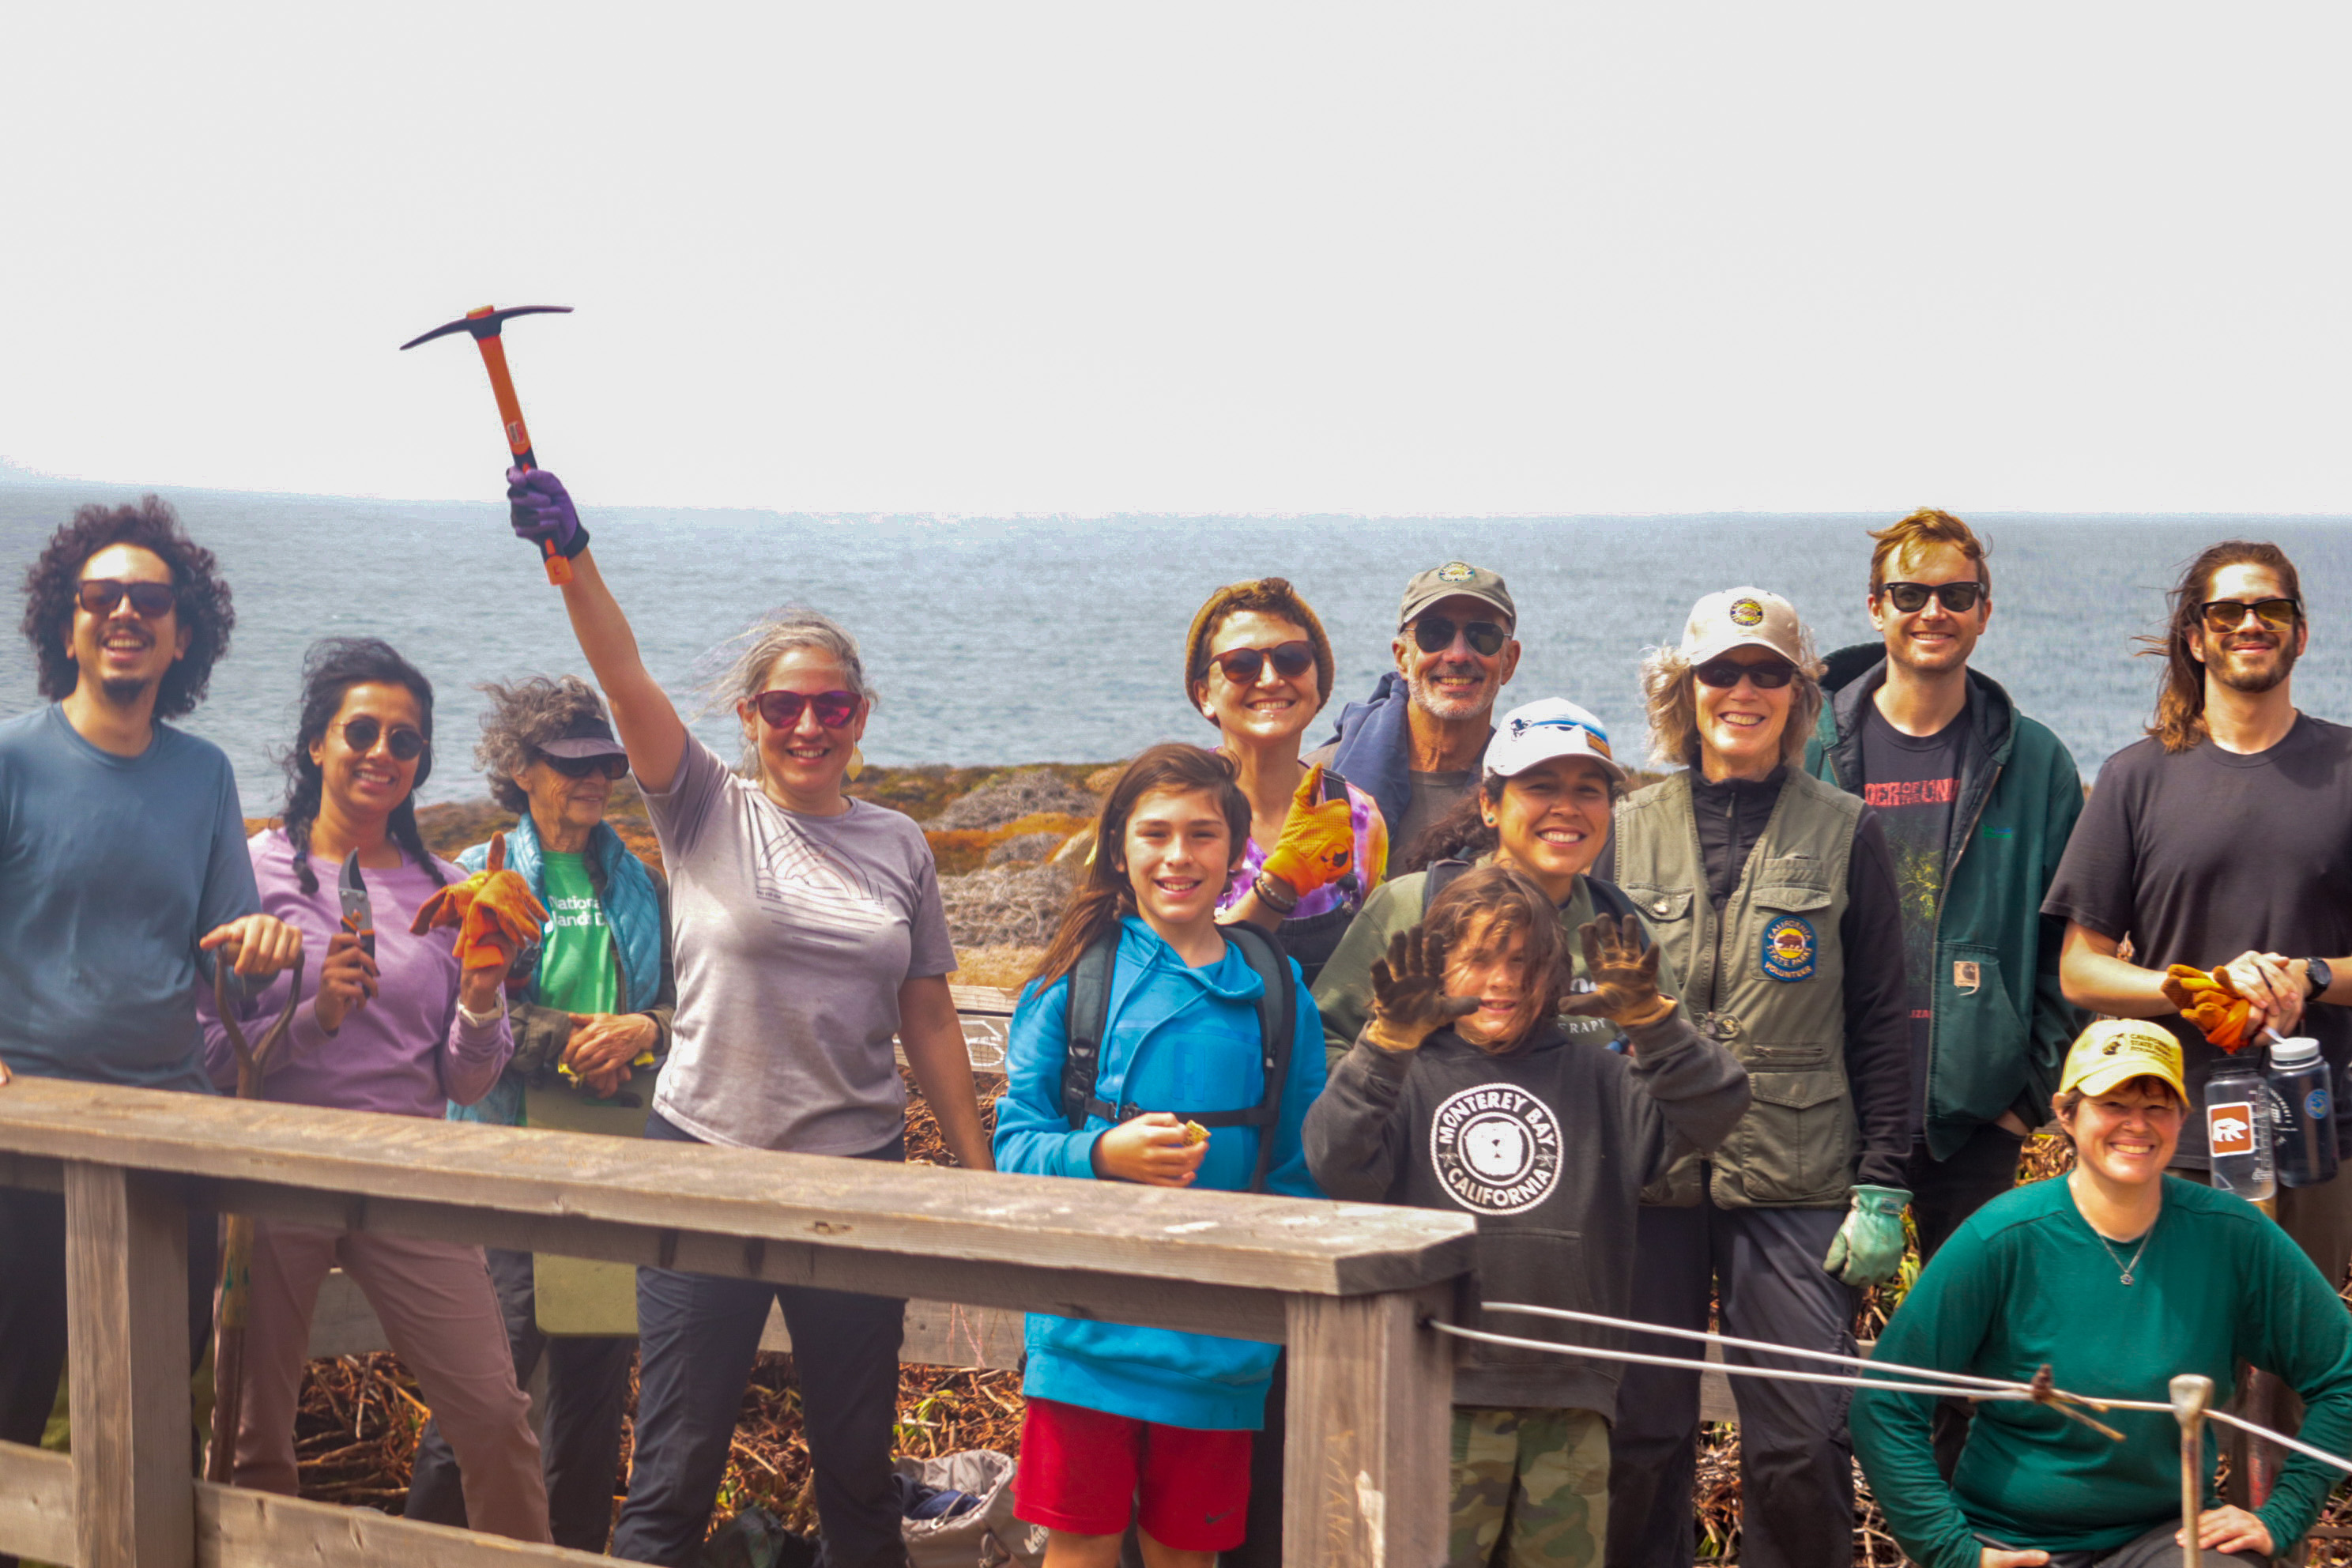 Volunteers pose after a morning of ice plant removal on the Garrapata State Park bluffs.